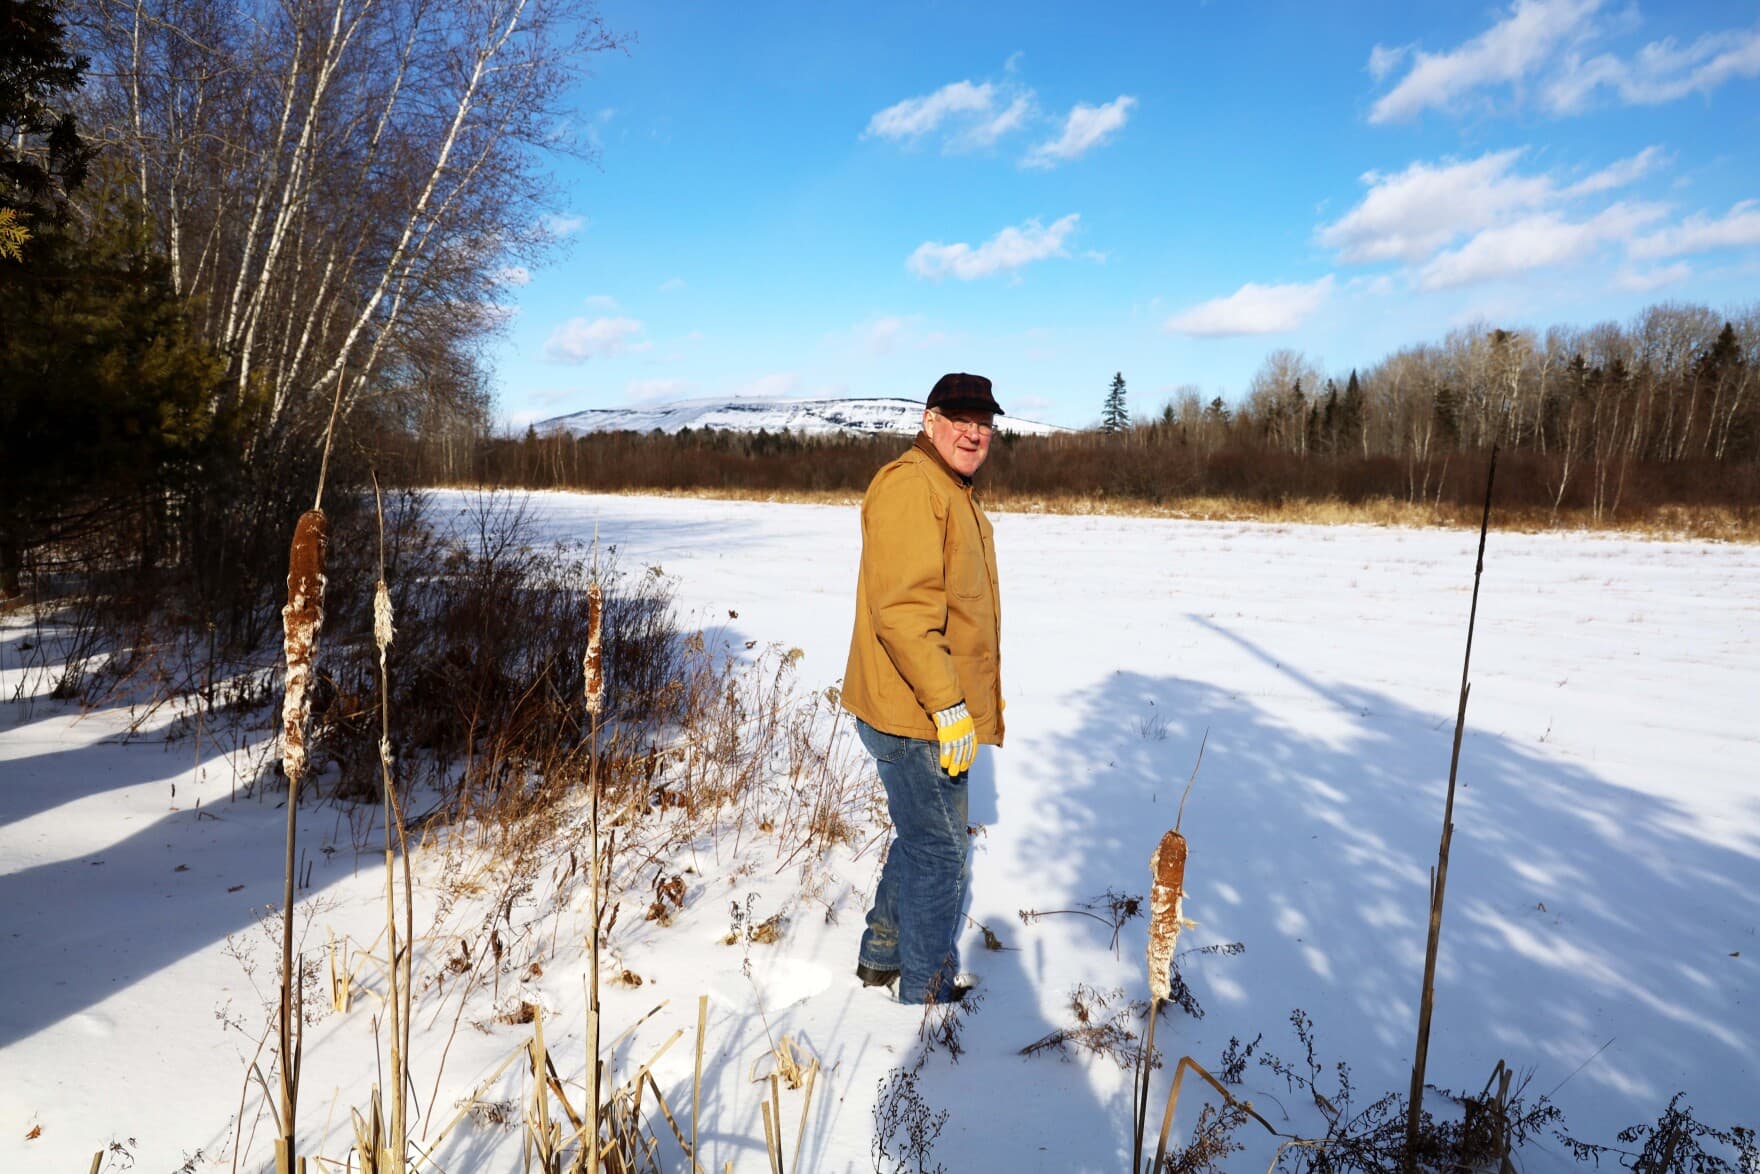 Ed Spencer, a West Old Town resident whose home is less than two miles from Juniper Ridge, looks at the dump from one part of town. (Esta Pratt-Kielley/Maine Public)